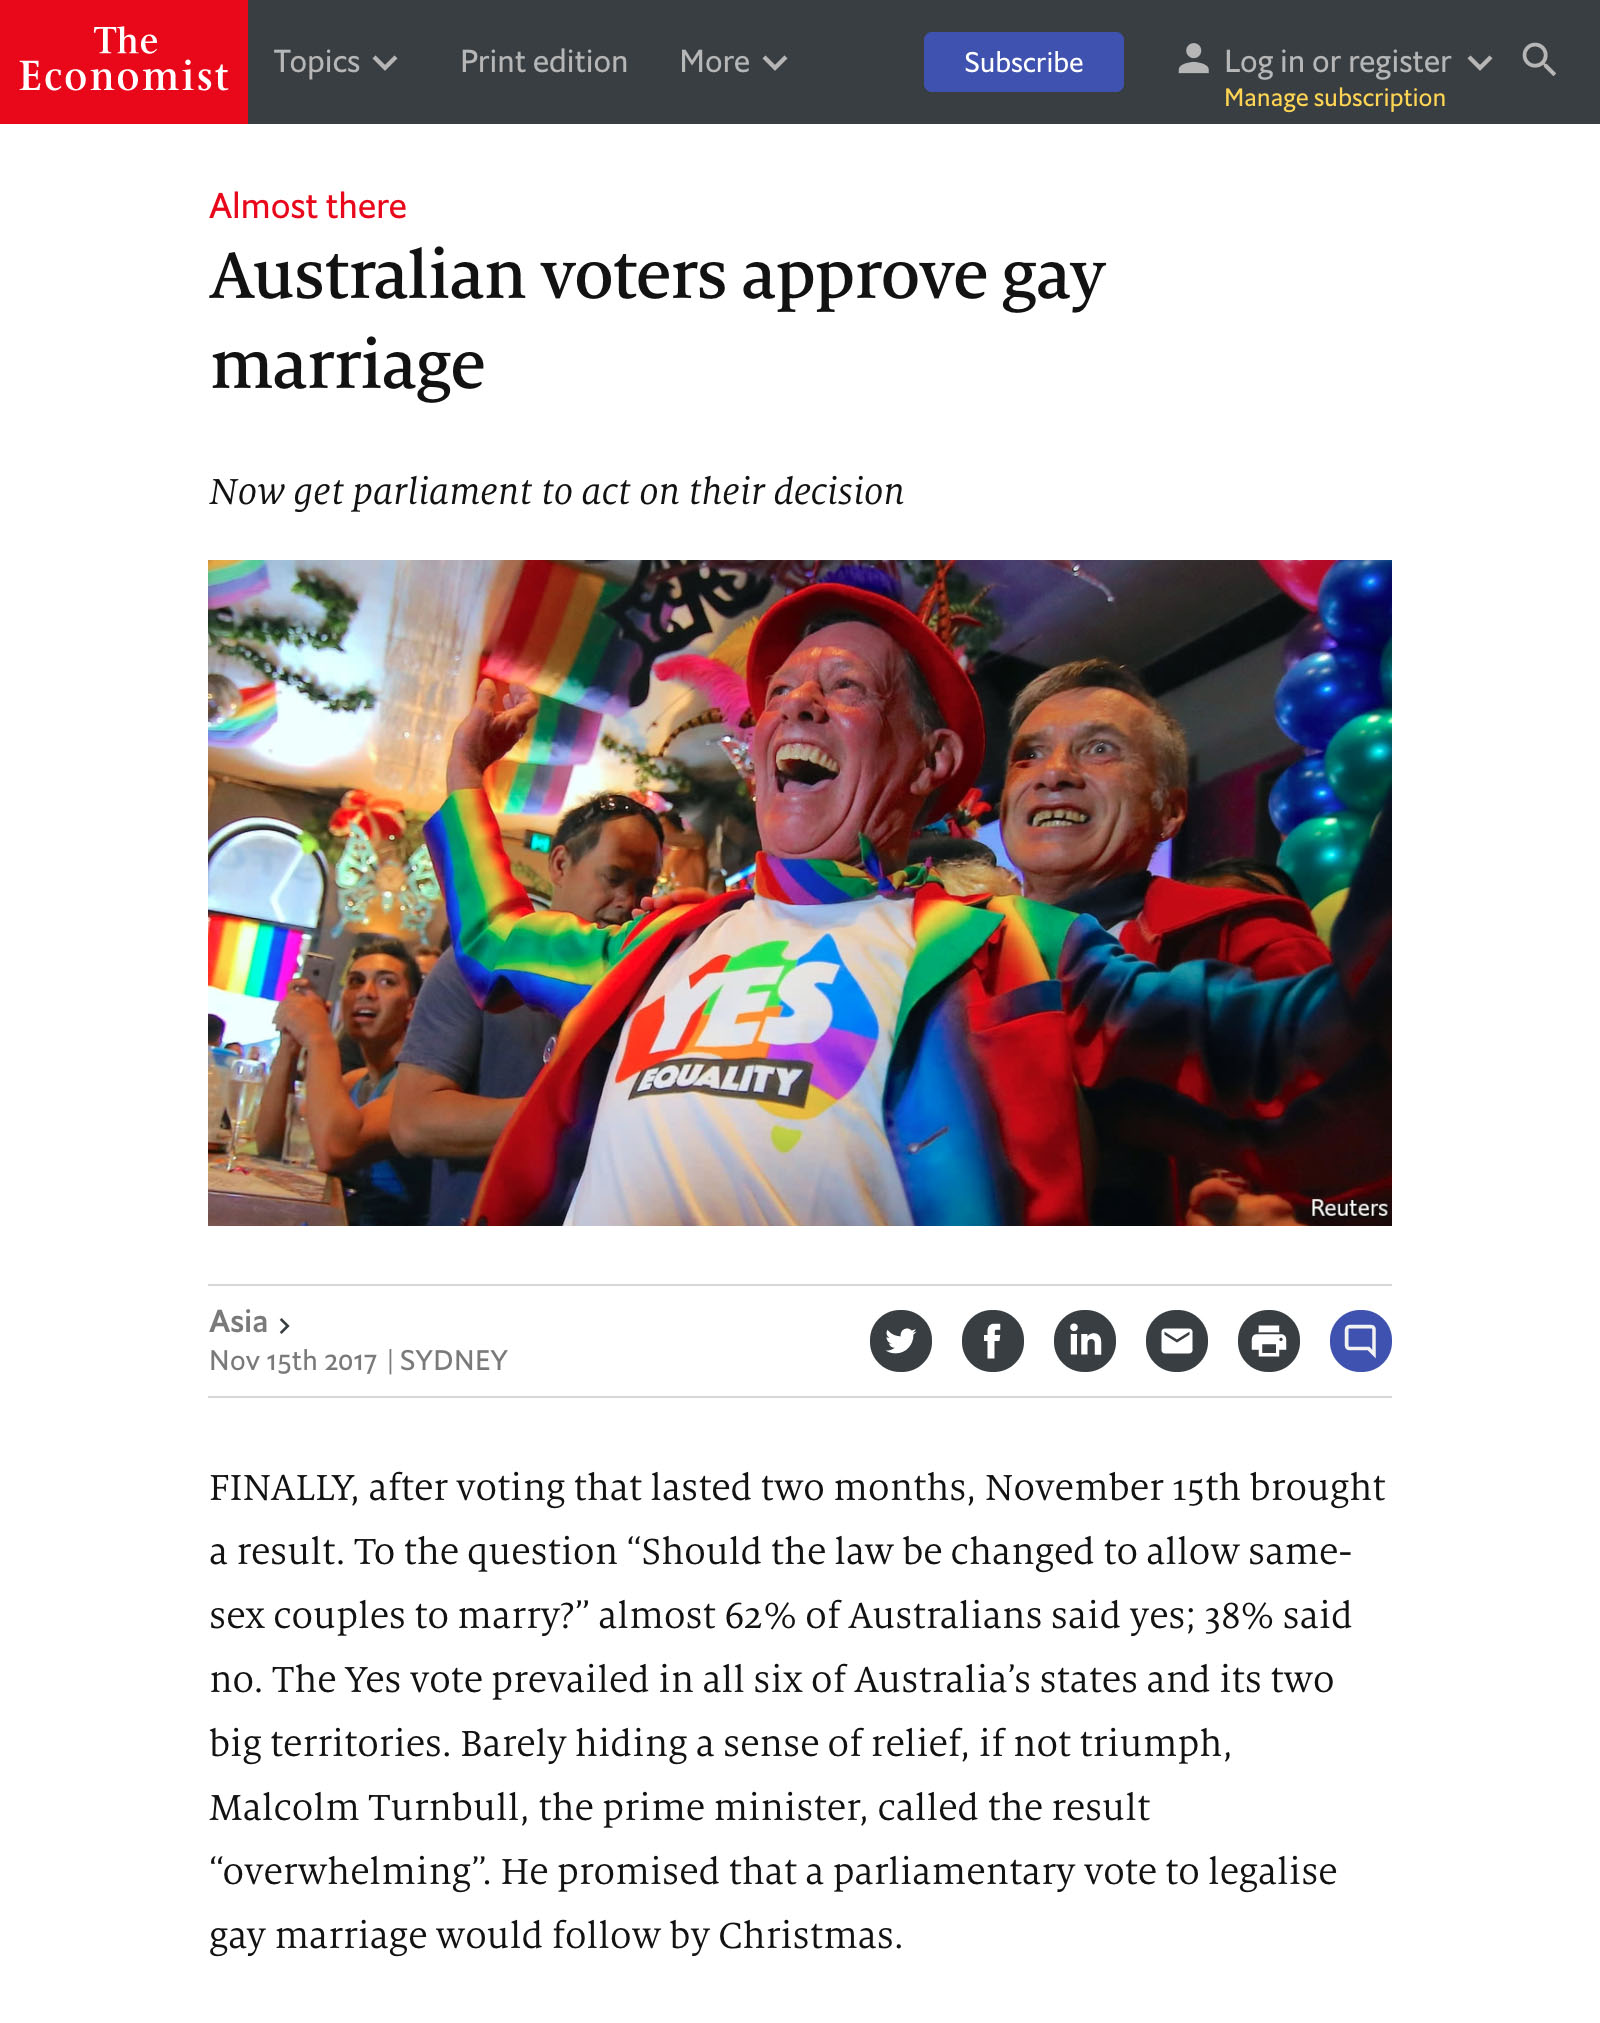 www.economist.com_news_asia_21731368-now-get-parliament-act-their-decision-australian-voters-approve-gay-marriage.jpg